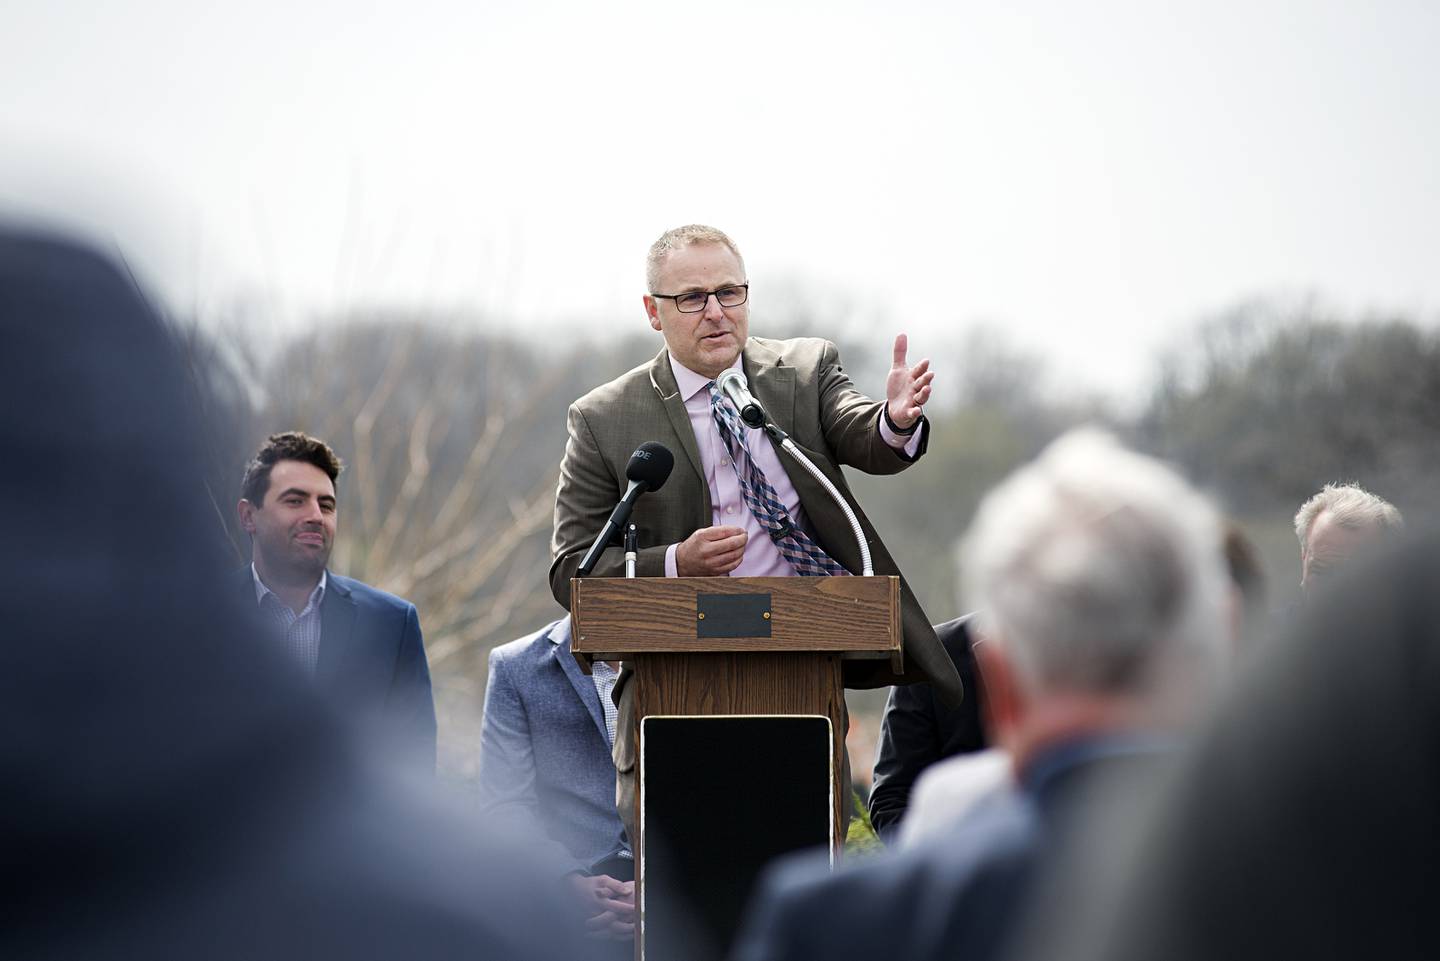 Dixon City Manager Danny Langloss gestures while saying what an exciting time it is to live and be part of the Dixon community during the Gateway project groundbreaking on Thursday.